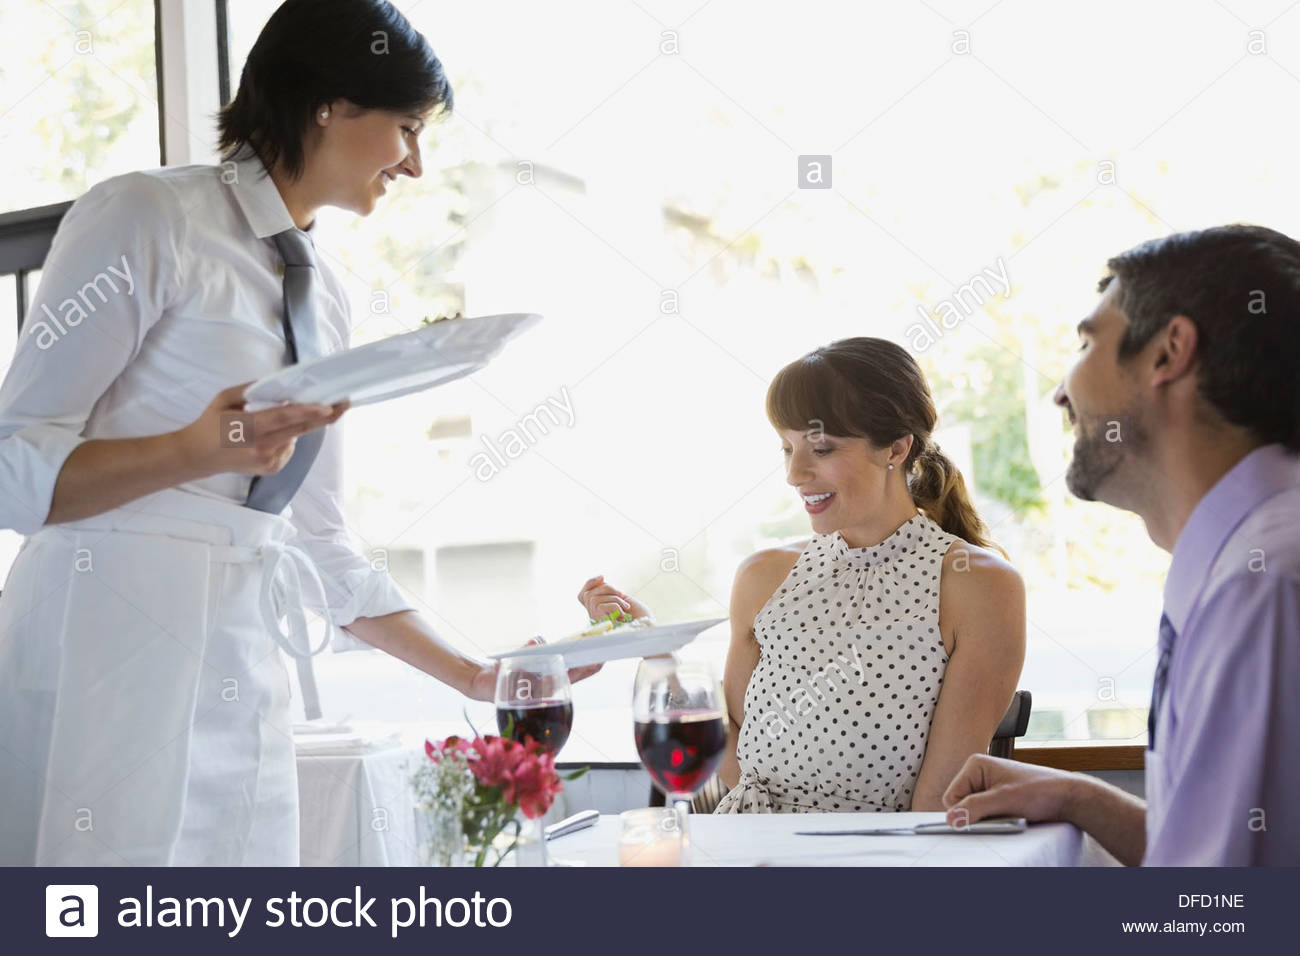 Waitress Serving Food To Couple In Restaurant Stock Photo Alamy